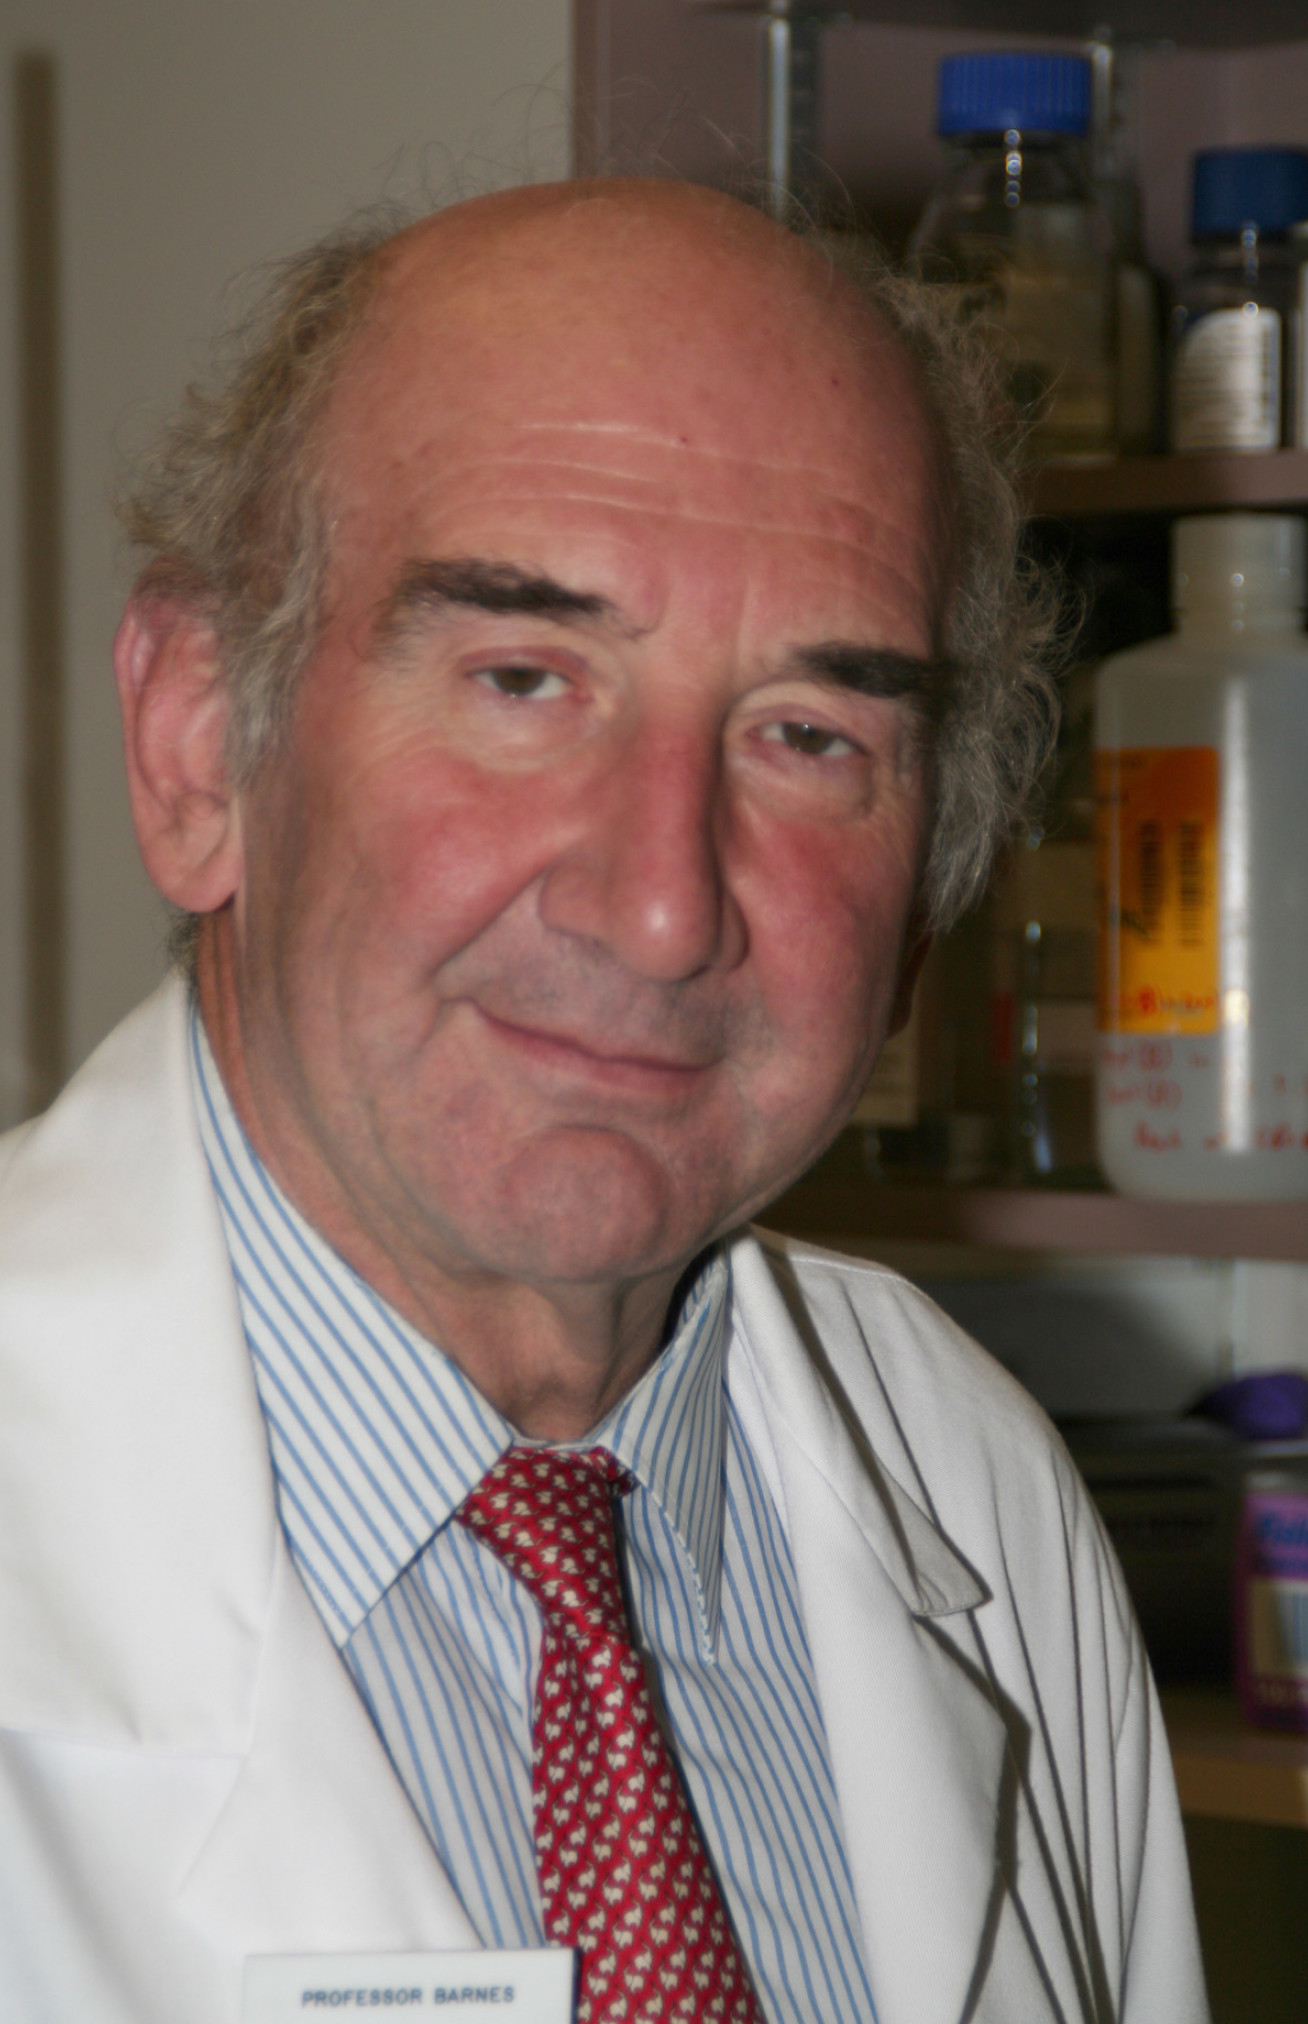 Professor Peter Barnes, from Imperial's National Heart and Lung Institute